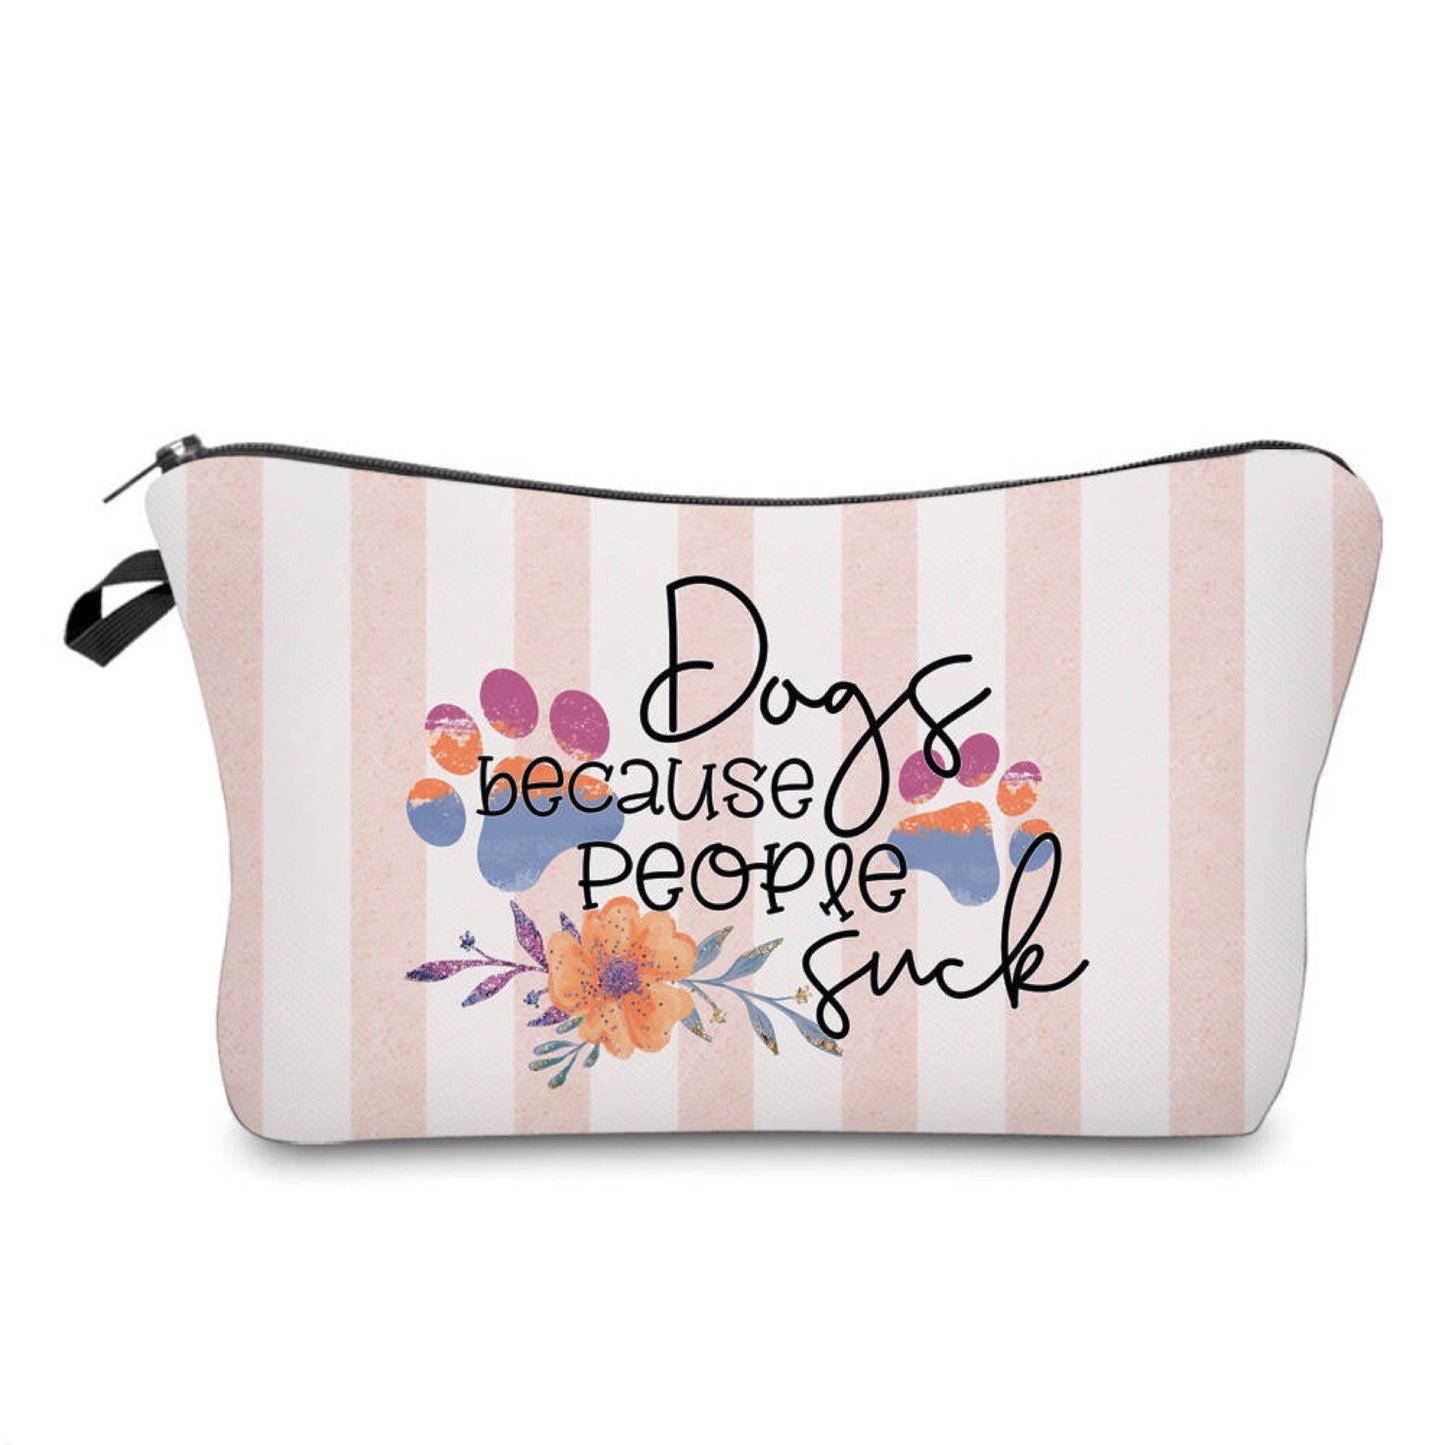 Dogs, People Suck - Water-Resistant Multi-Use Pouch